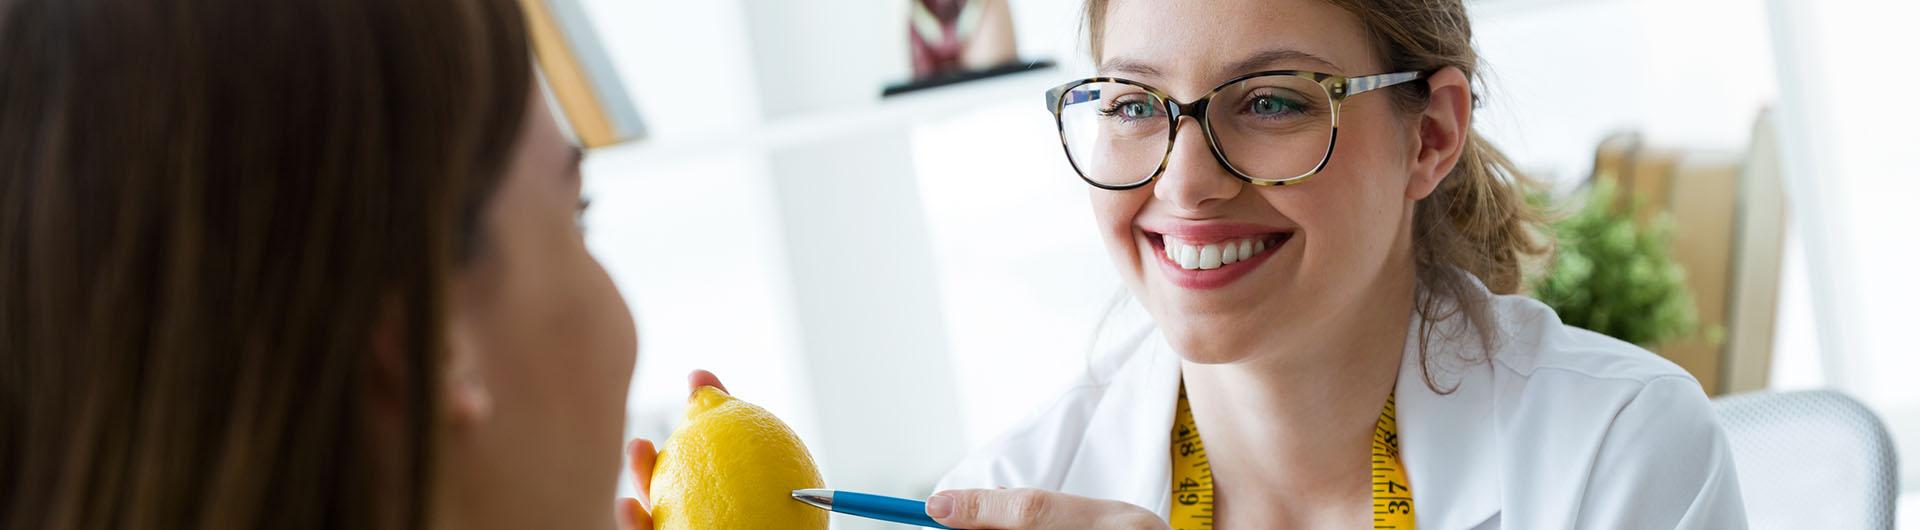 Dietician explaining to her patient the properties of the lemon during consultation